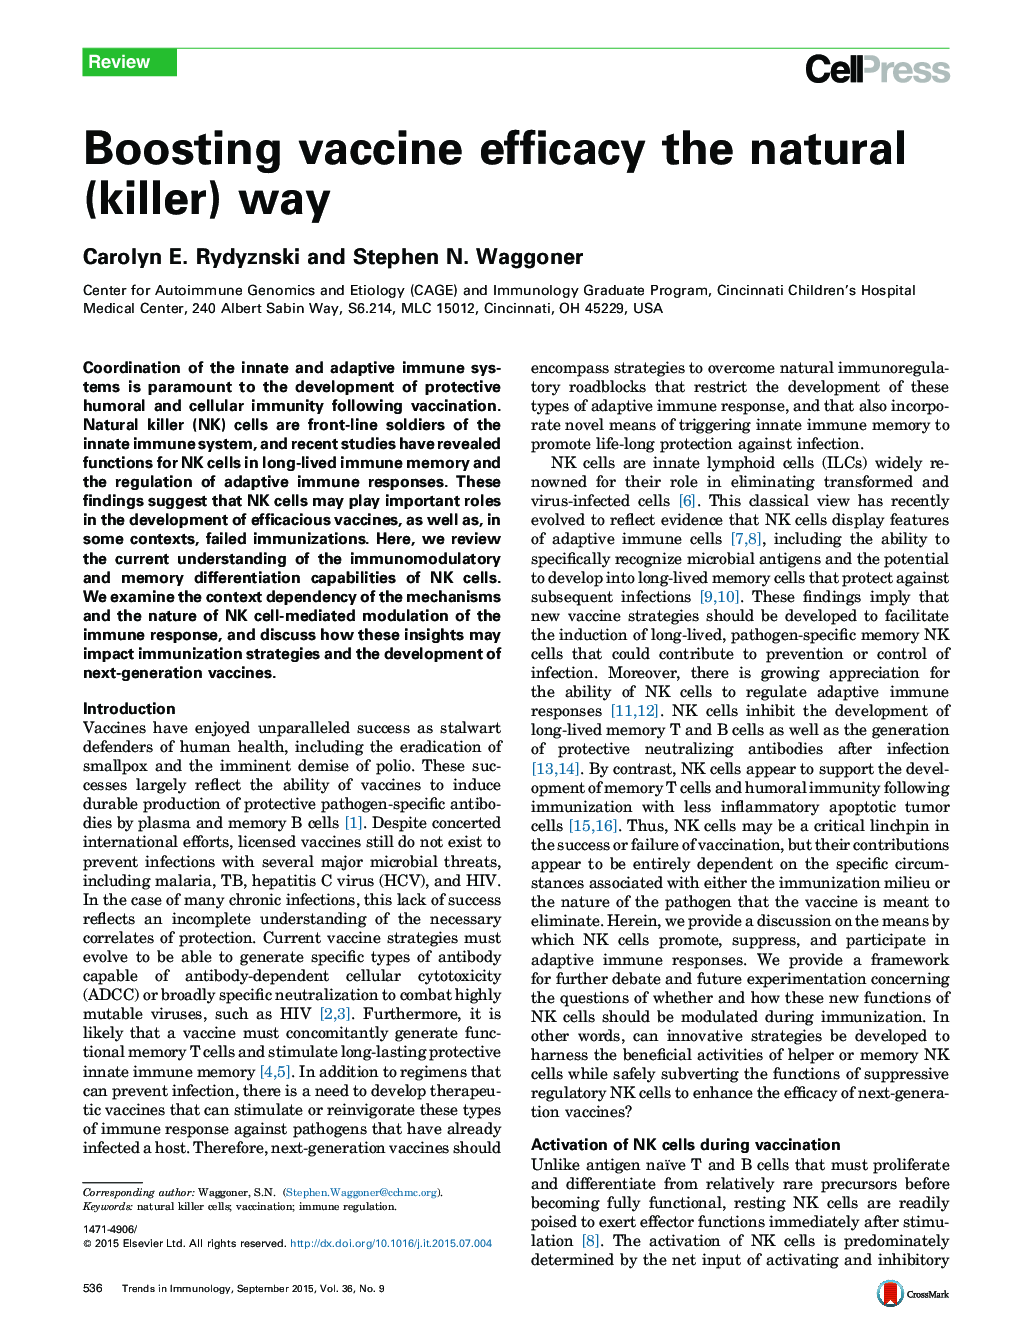 Boosting vaccine efficacy the natural (killer) way